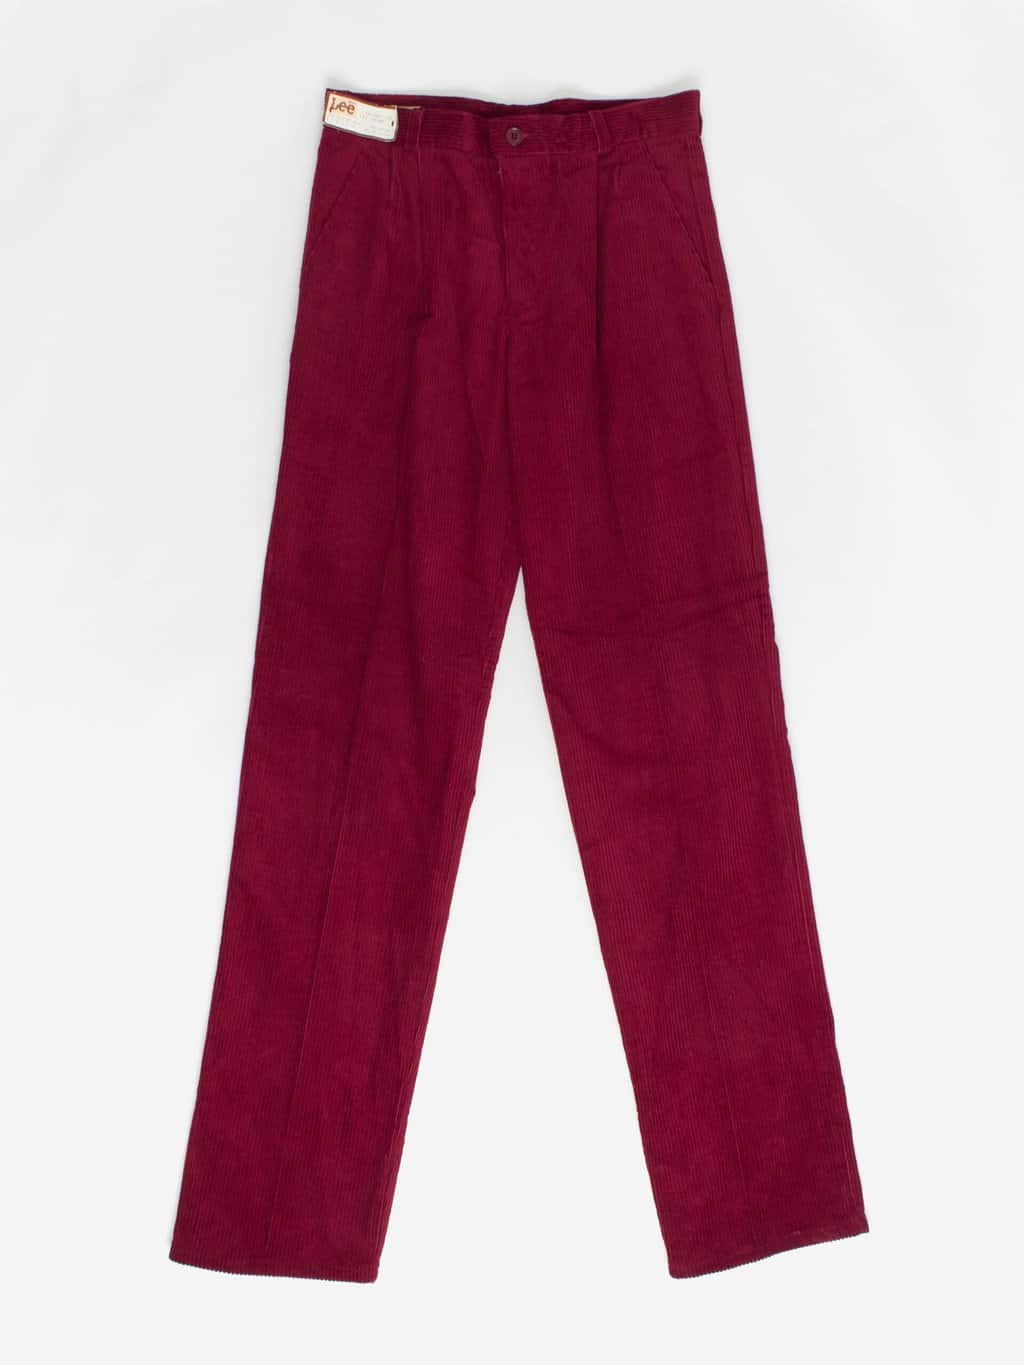 Deadstock 70s vintage Lee corduroy trousers 31 X 36 deep red soft cord,  rare with original tags